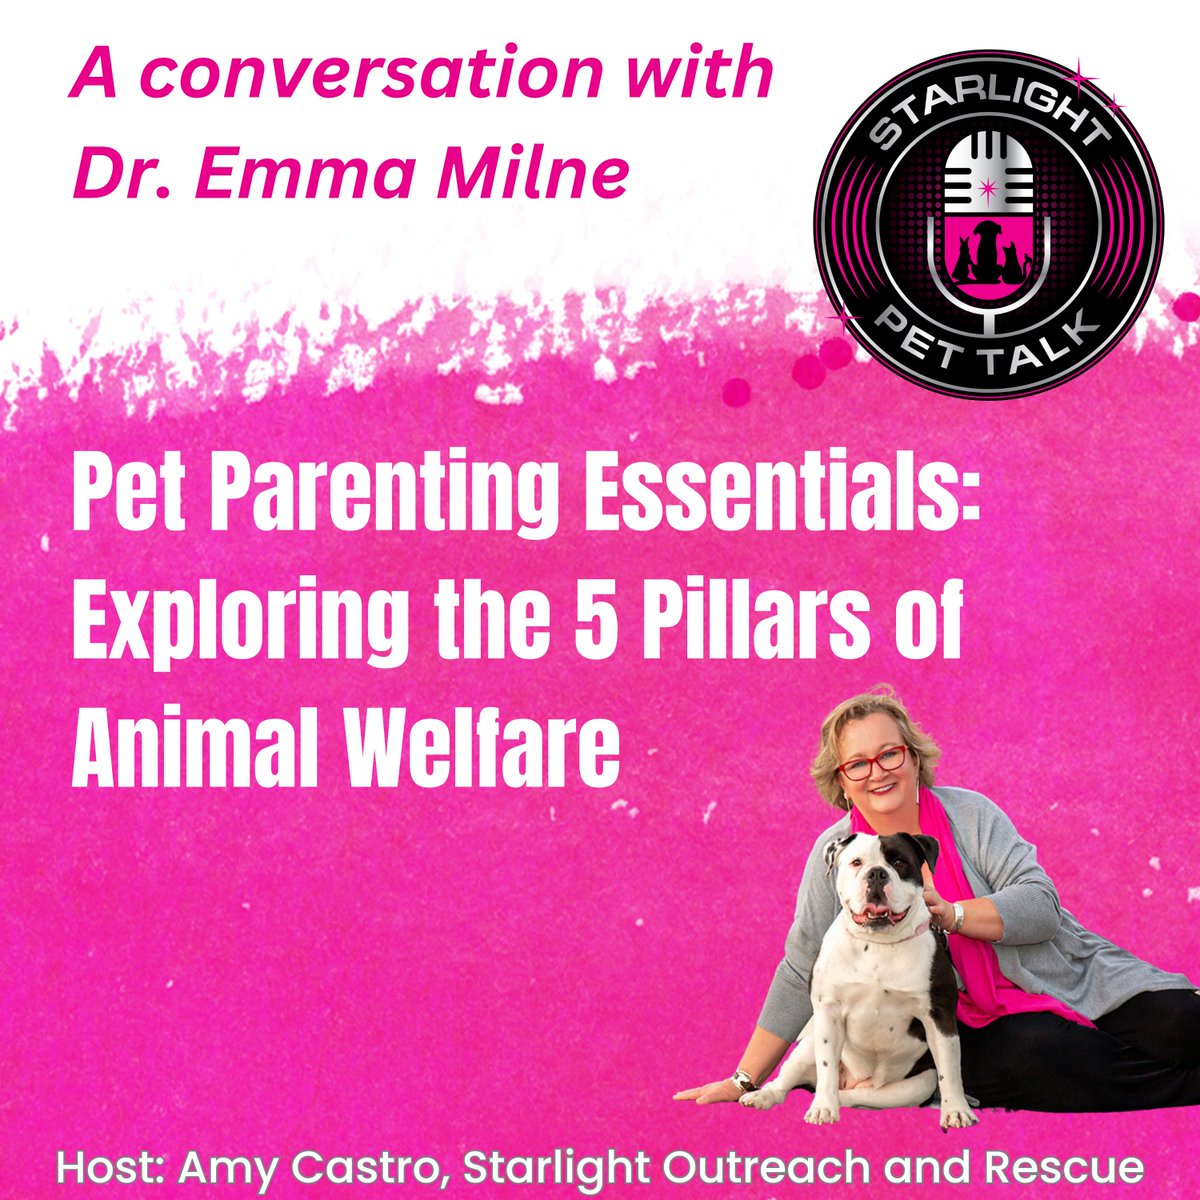 Here is the first part of my discussion with the lovely Amy from Starlight Pet talk. A discussion around the welfare needs of pets, cultural differences and responsible pet choices. I hope you find it interesting.

starlightpettalk.com/5-animal-welfa…